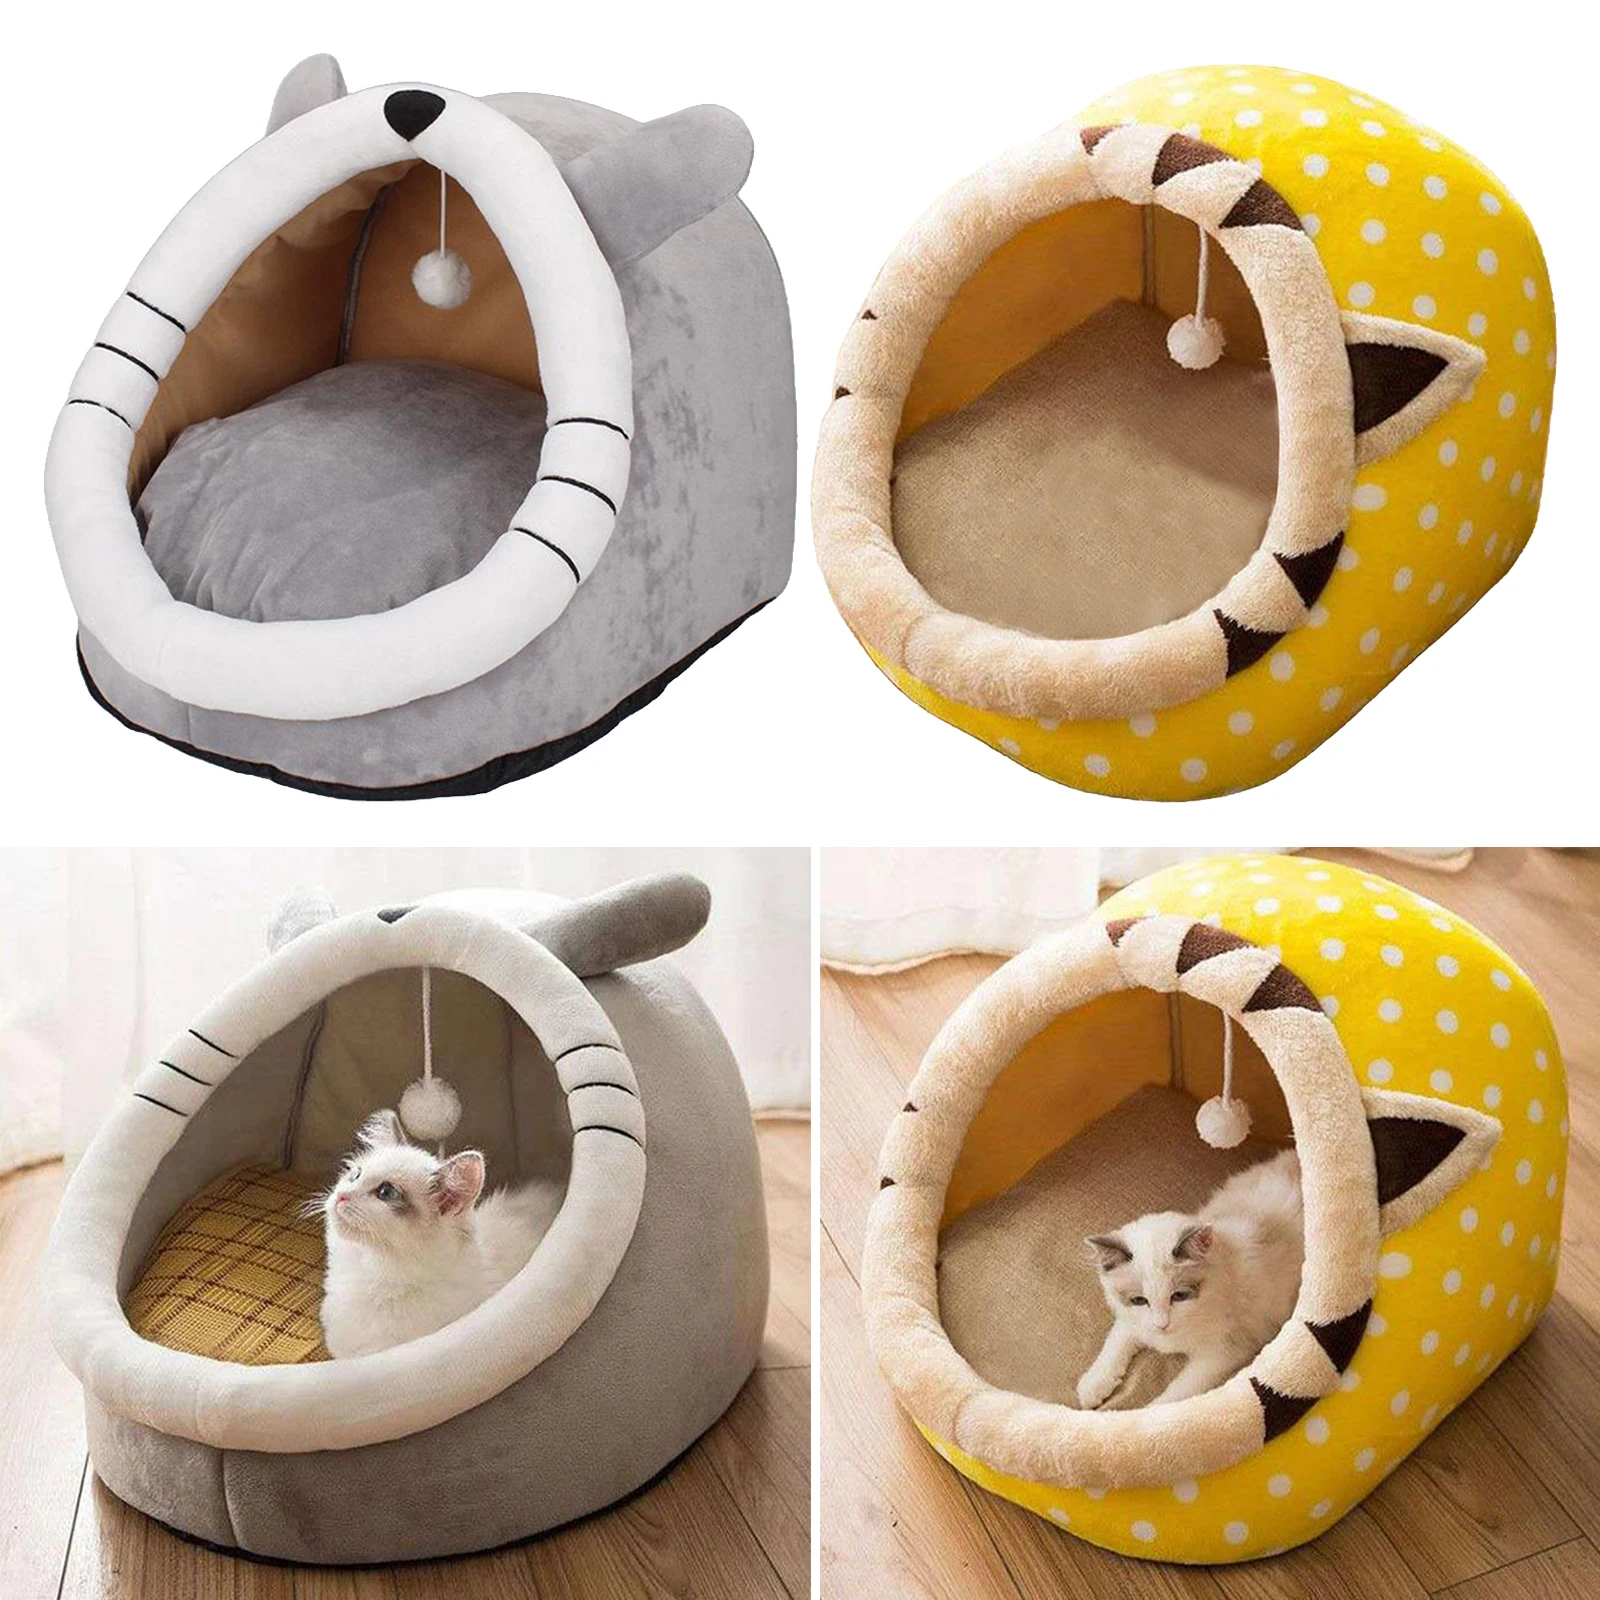 Soft Dog Bed Adorable Pet Winter Sleeping Nest for Small Animals Cat Puppy Kitten